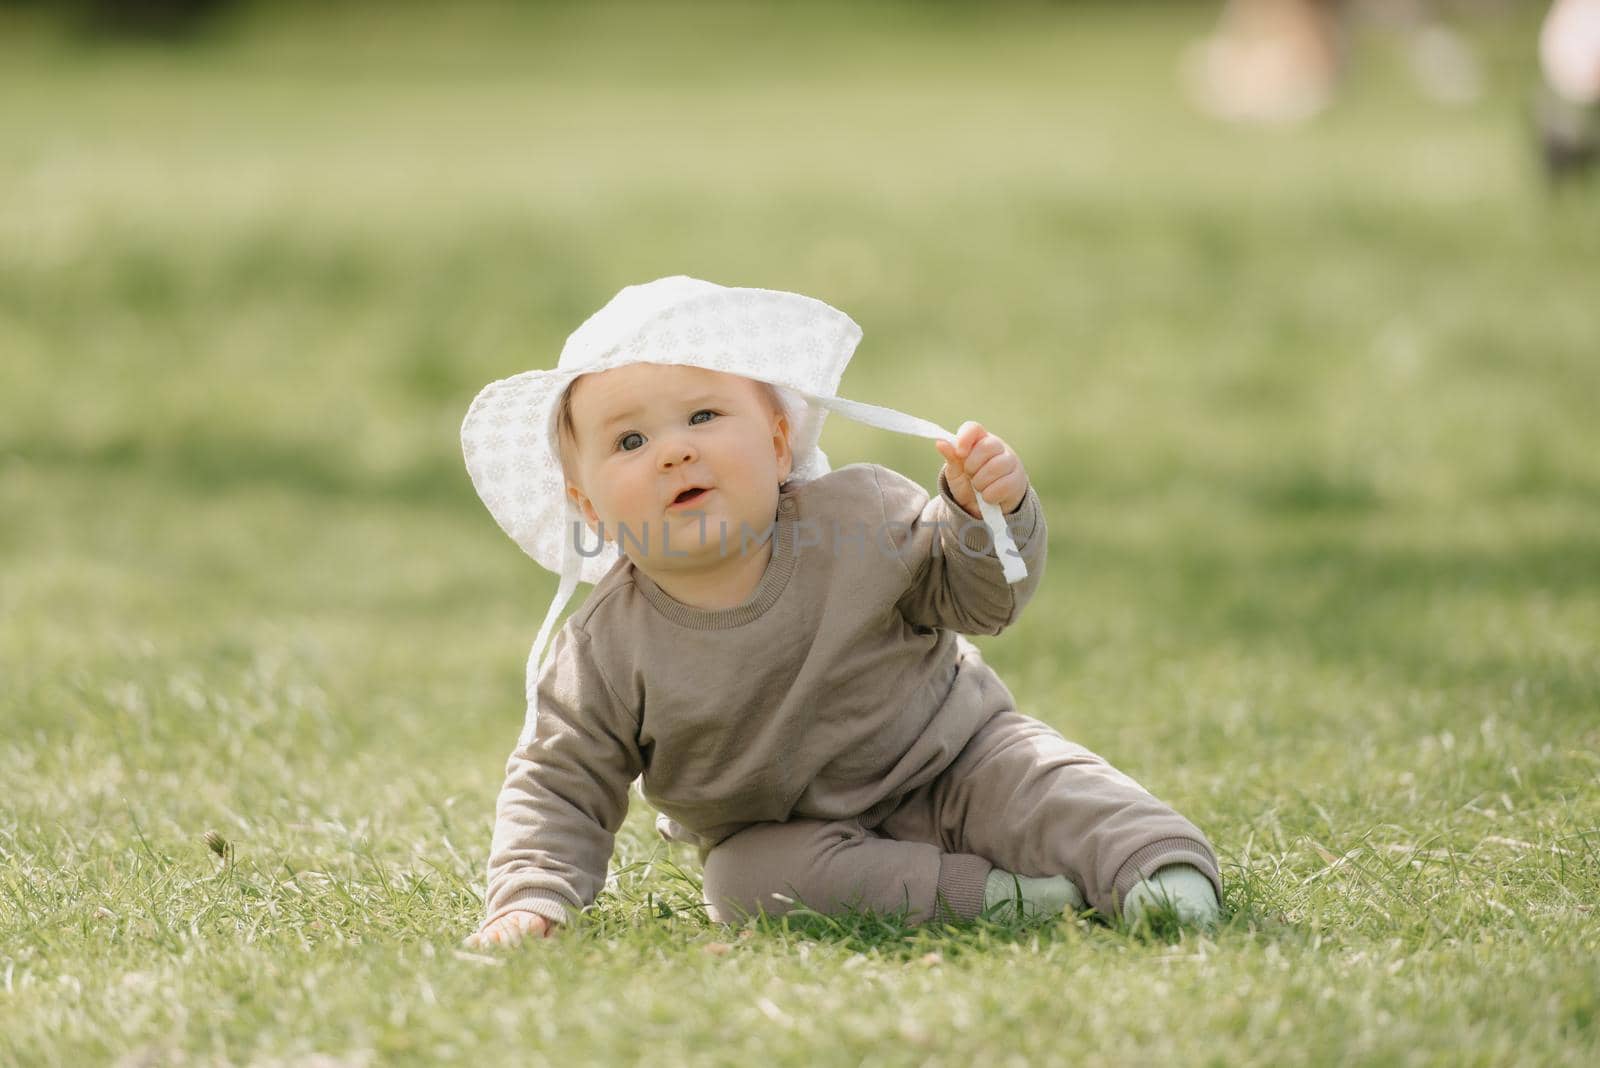 A 7-month child in the white panama hat is having fun in the meadow. An infant girl is crawling on the grass.